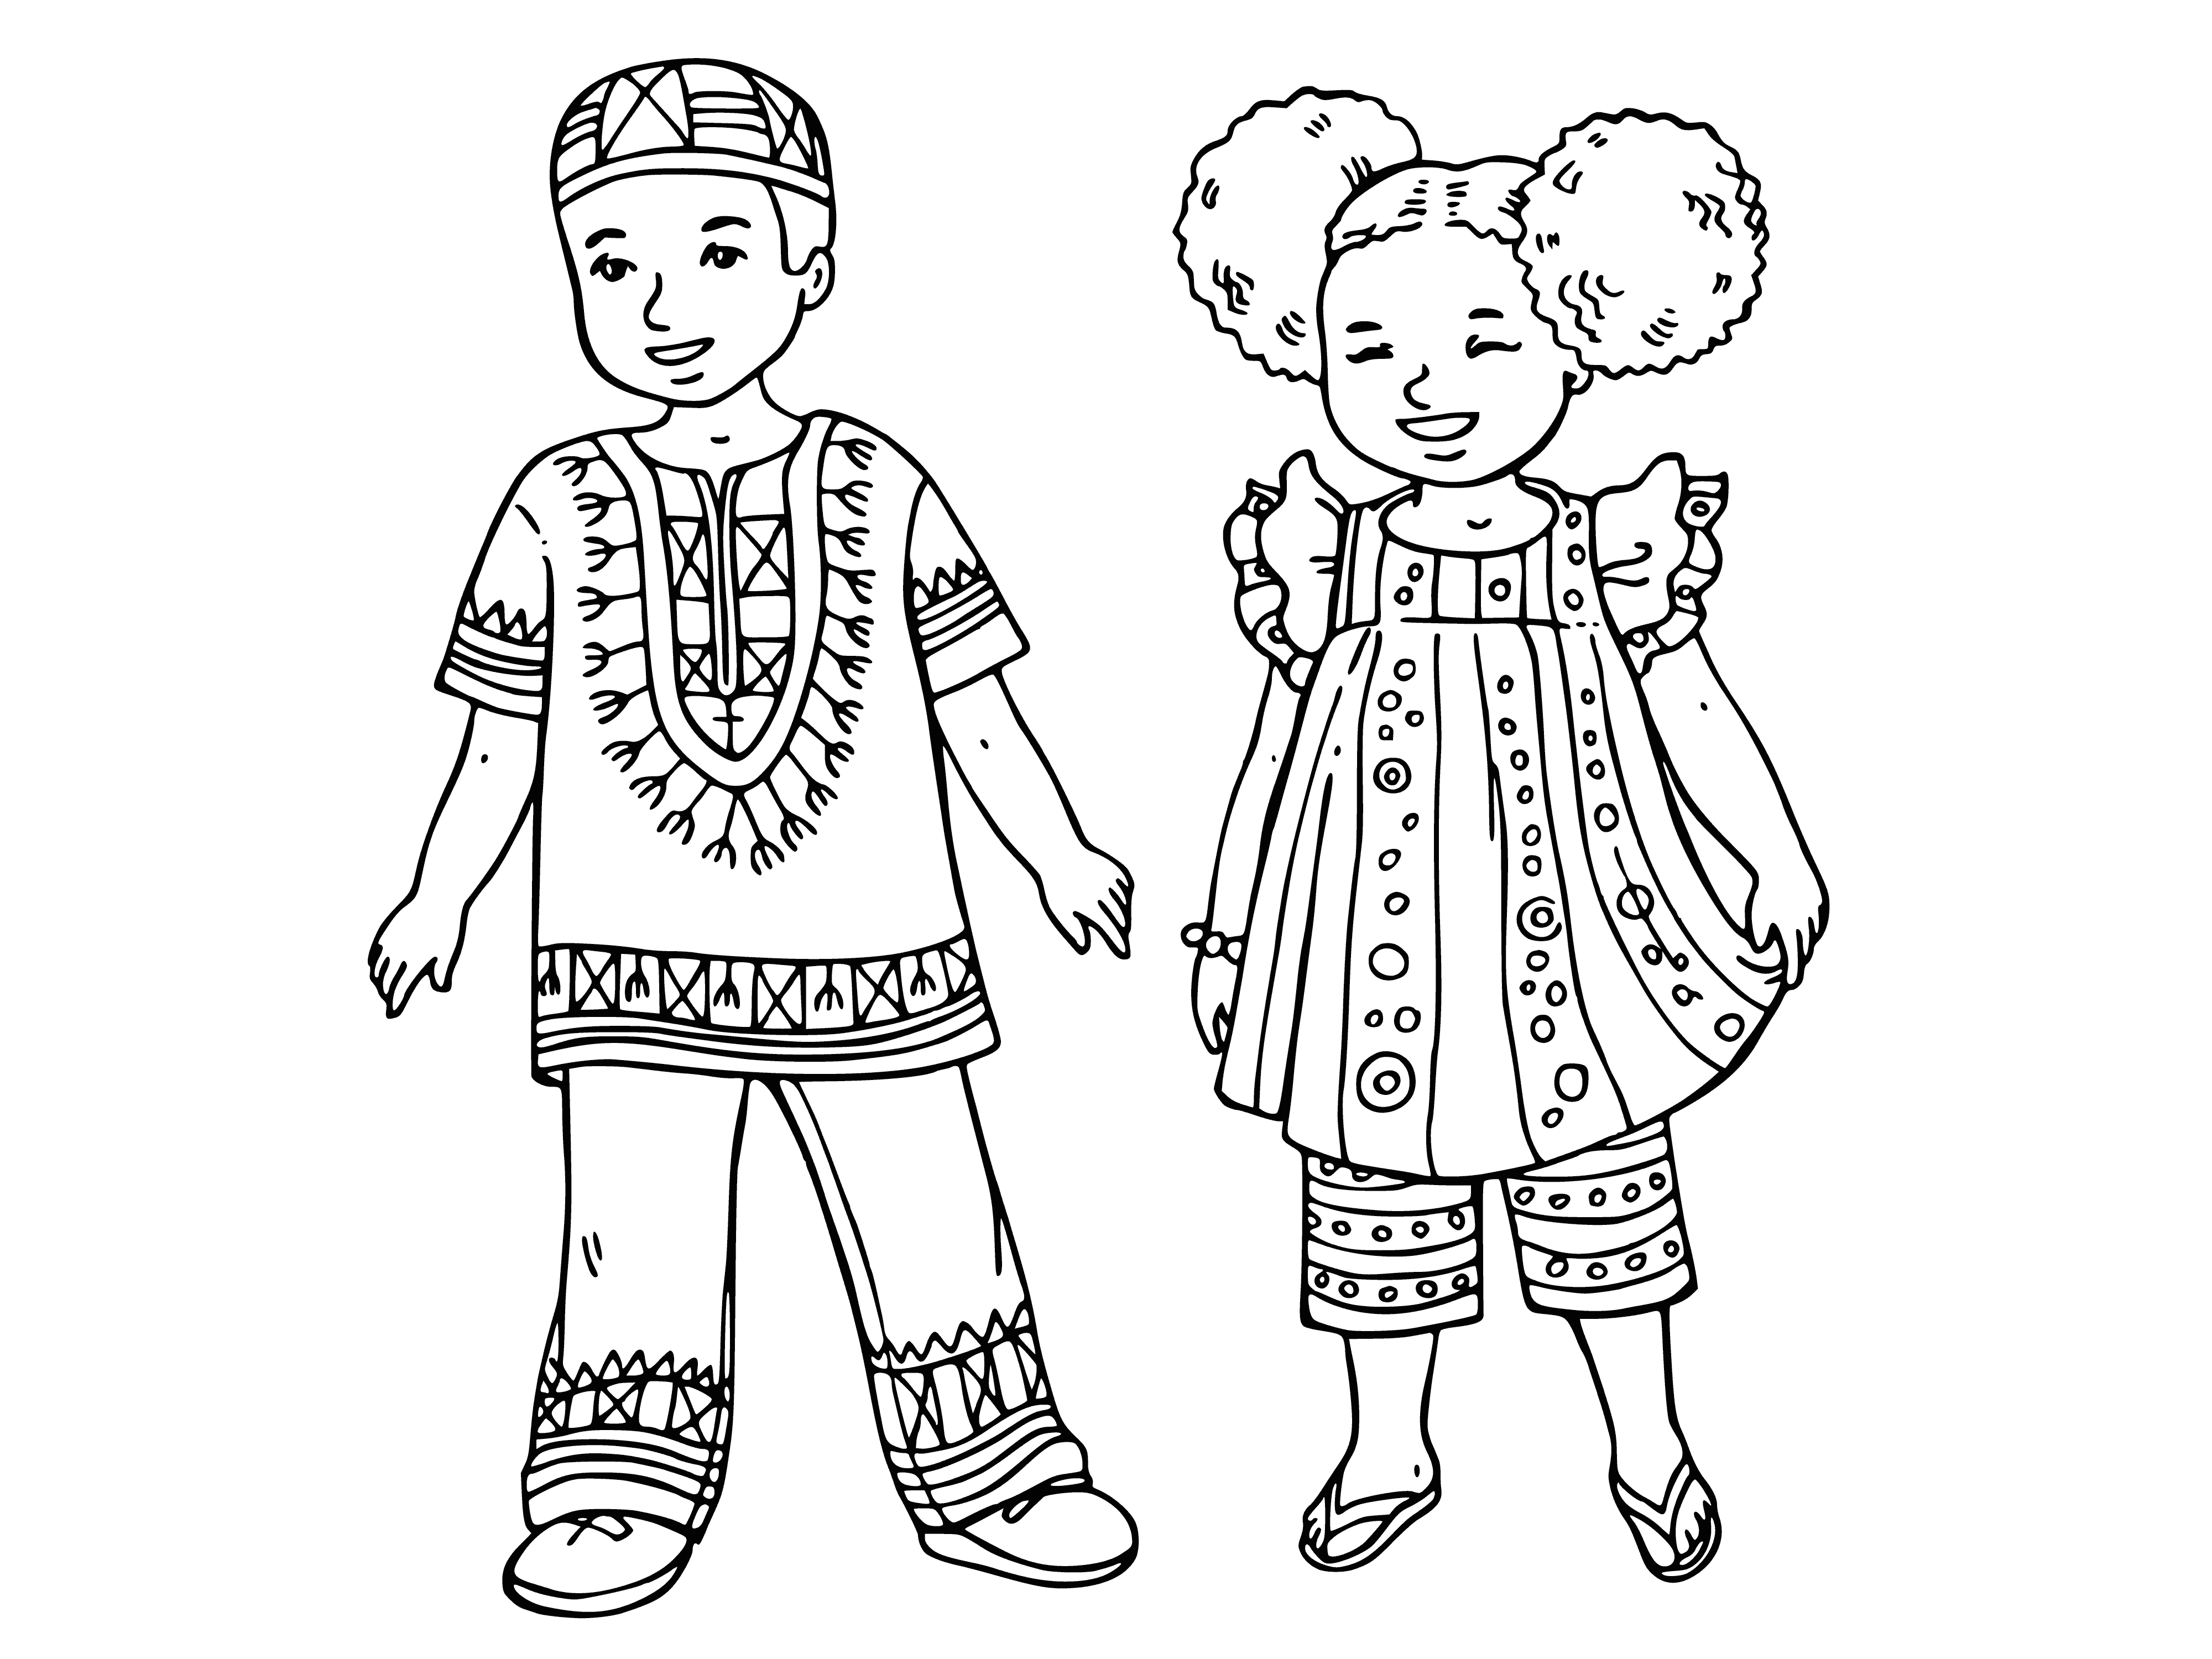 coloring page: Coloring page of African children wearing traditional clothing: long, brightly-colored dress, loose pants and shirt, plus turbans. #Tradition #Culture